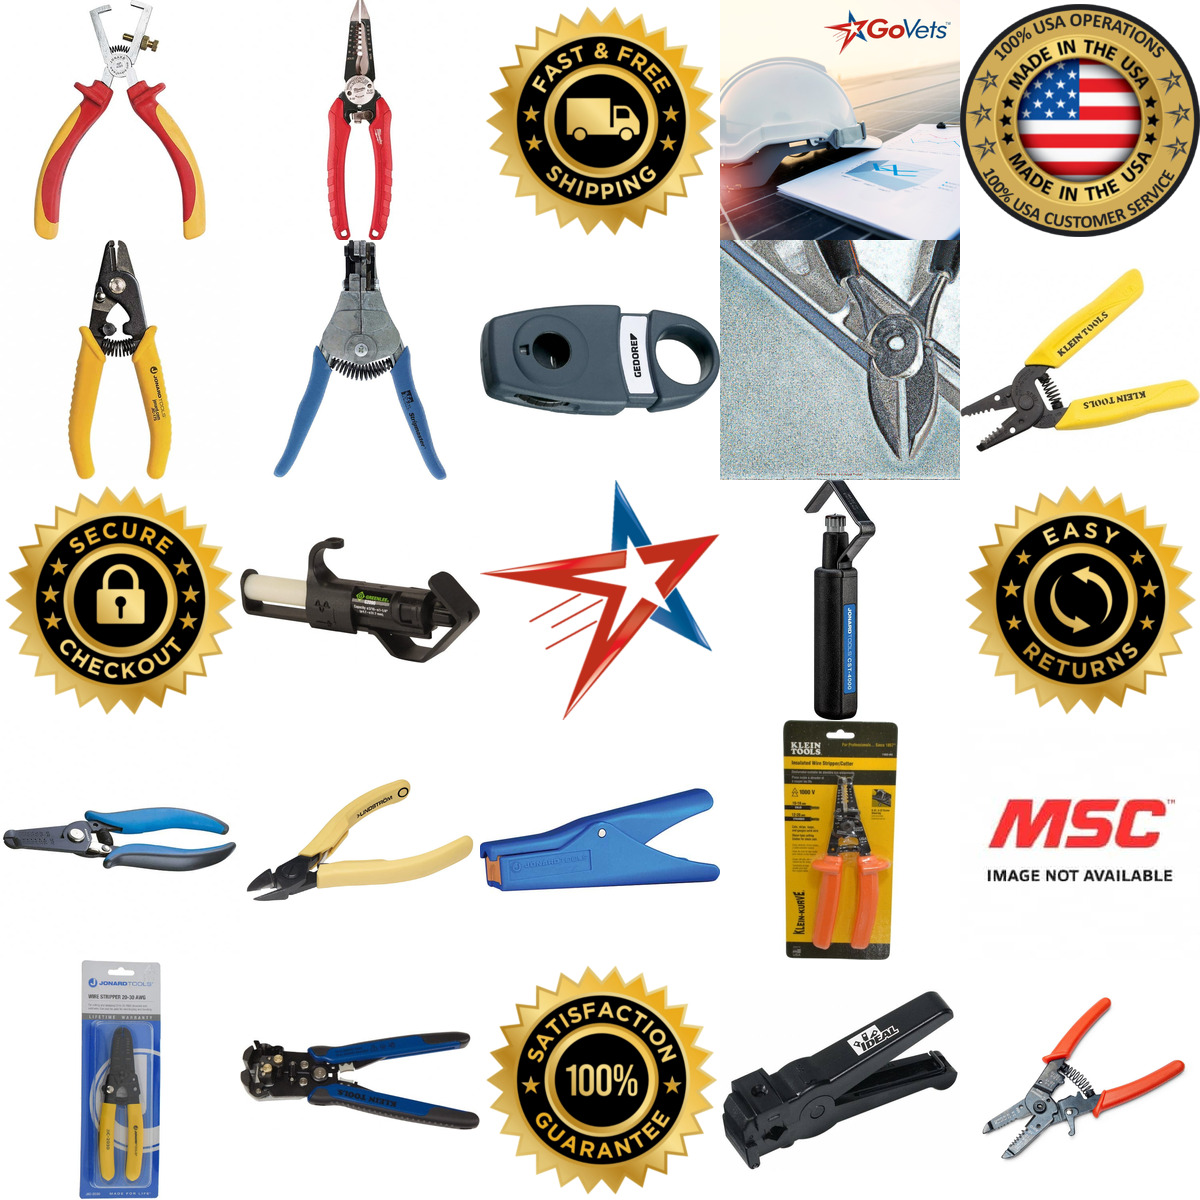 A selection of Wire and Cable Strippers products on GoVets